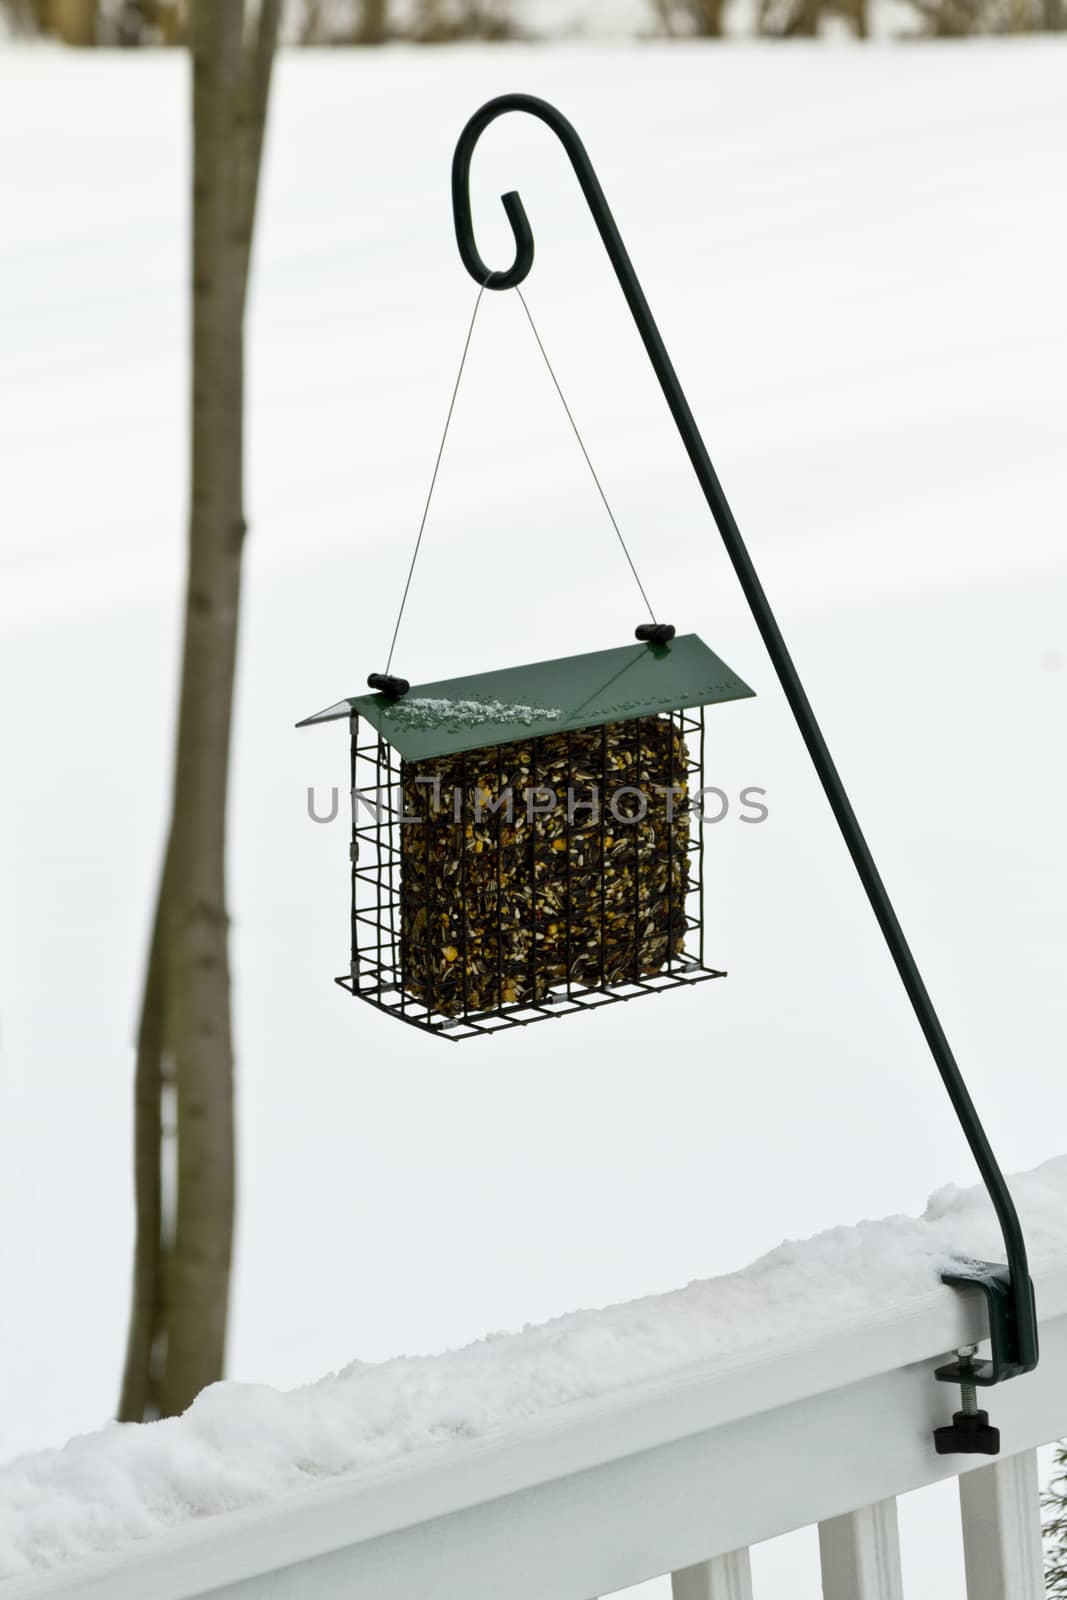 Block of bird seed hangs from porch rail on snowy, winter day